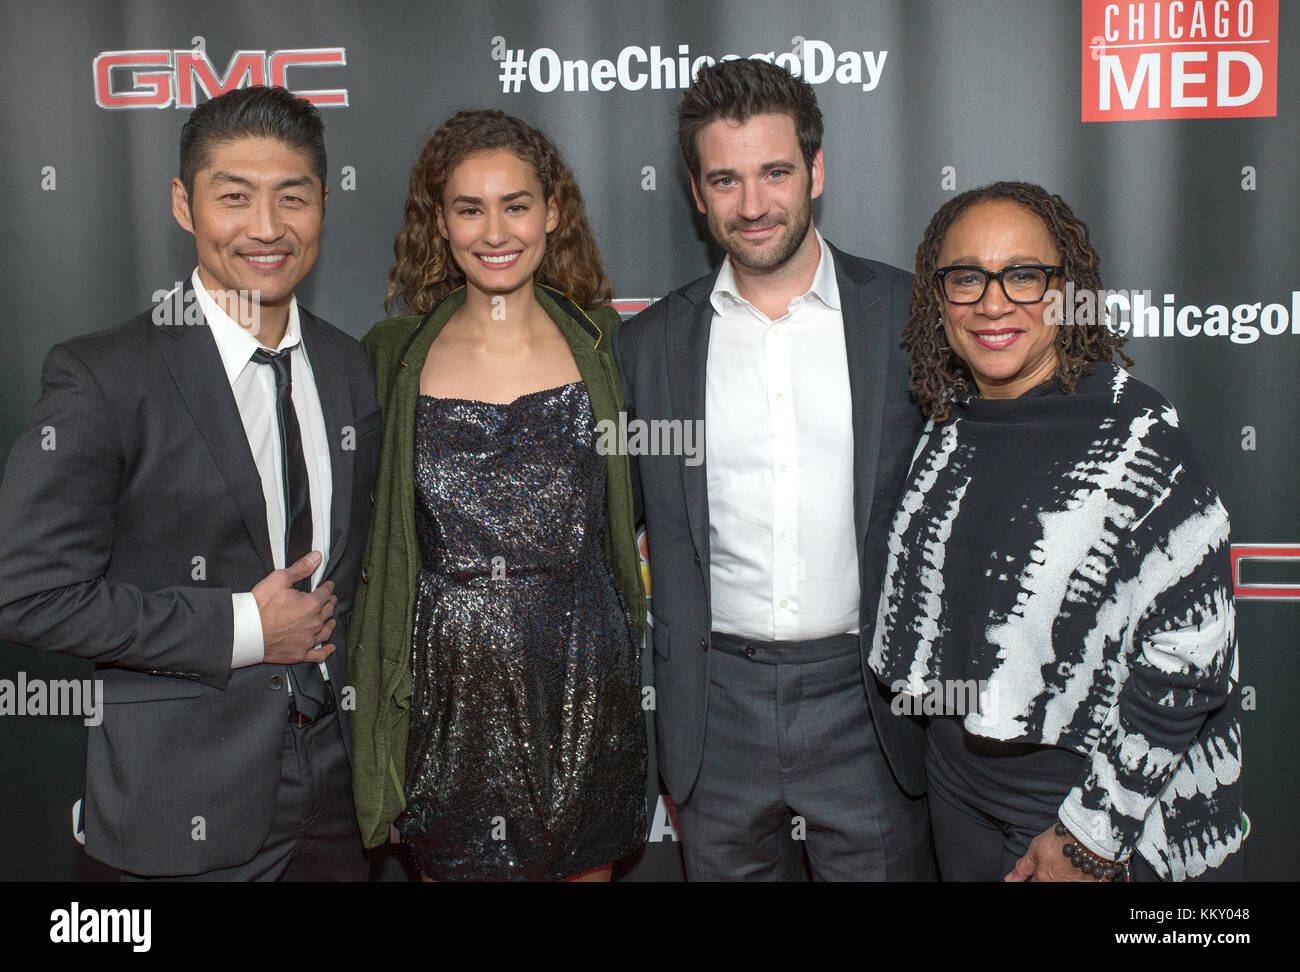 3rd annual NBC One Chicago Party featuring cast members from Chicago Fire, Chicago Med and Chicago P.D - Arrivals  Featuring: Brian Tee, Rachel DiPillo, Colin Donnell, S. Epatha Merkerson Where: Chicago, Illinois, United States When: 30 Oct 2017 Credit: WENN Stock Photo